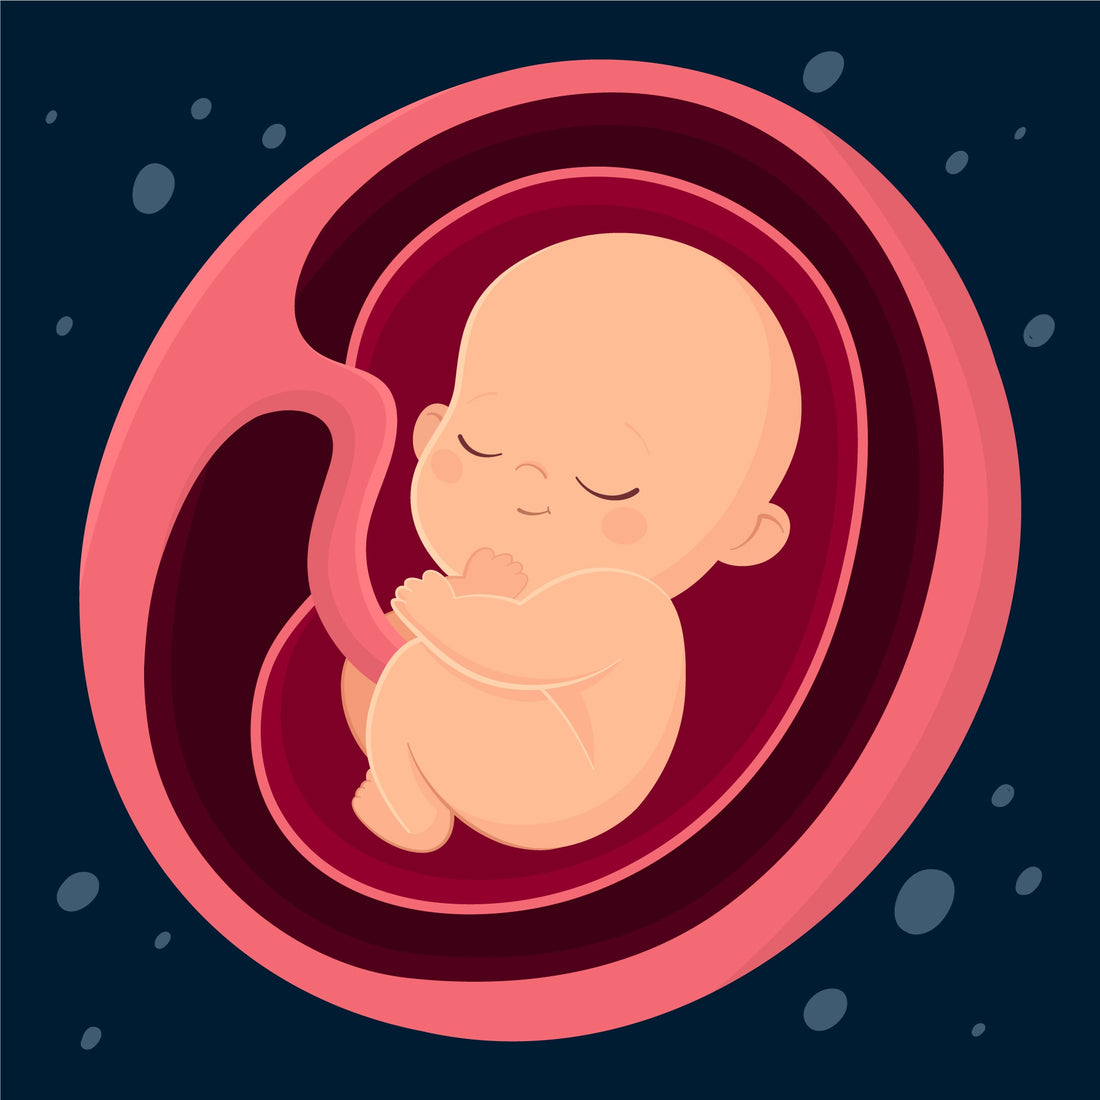 Exploring Alternative Uses for Placenta